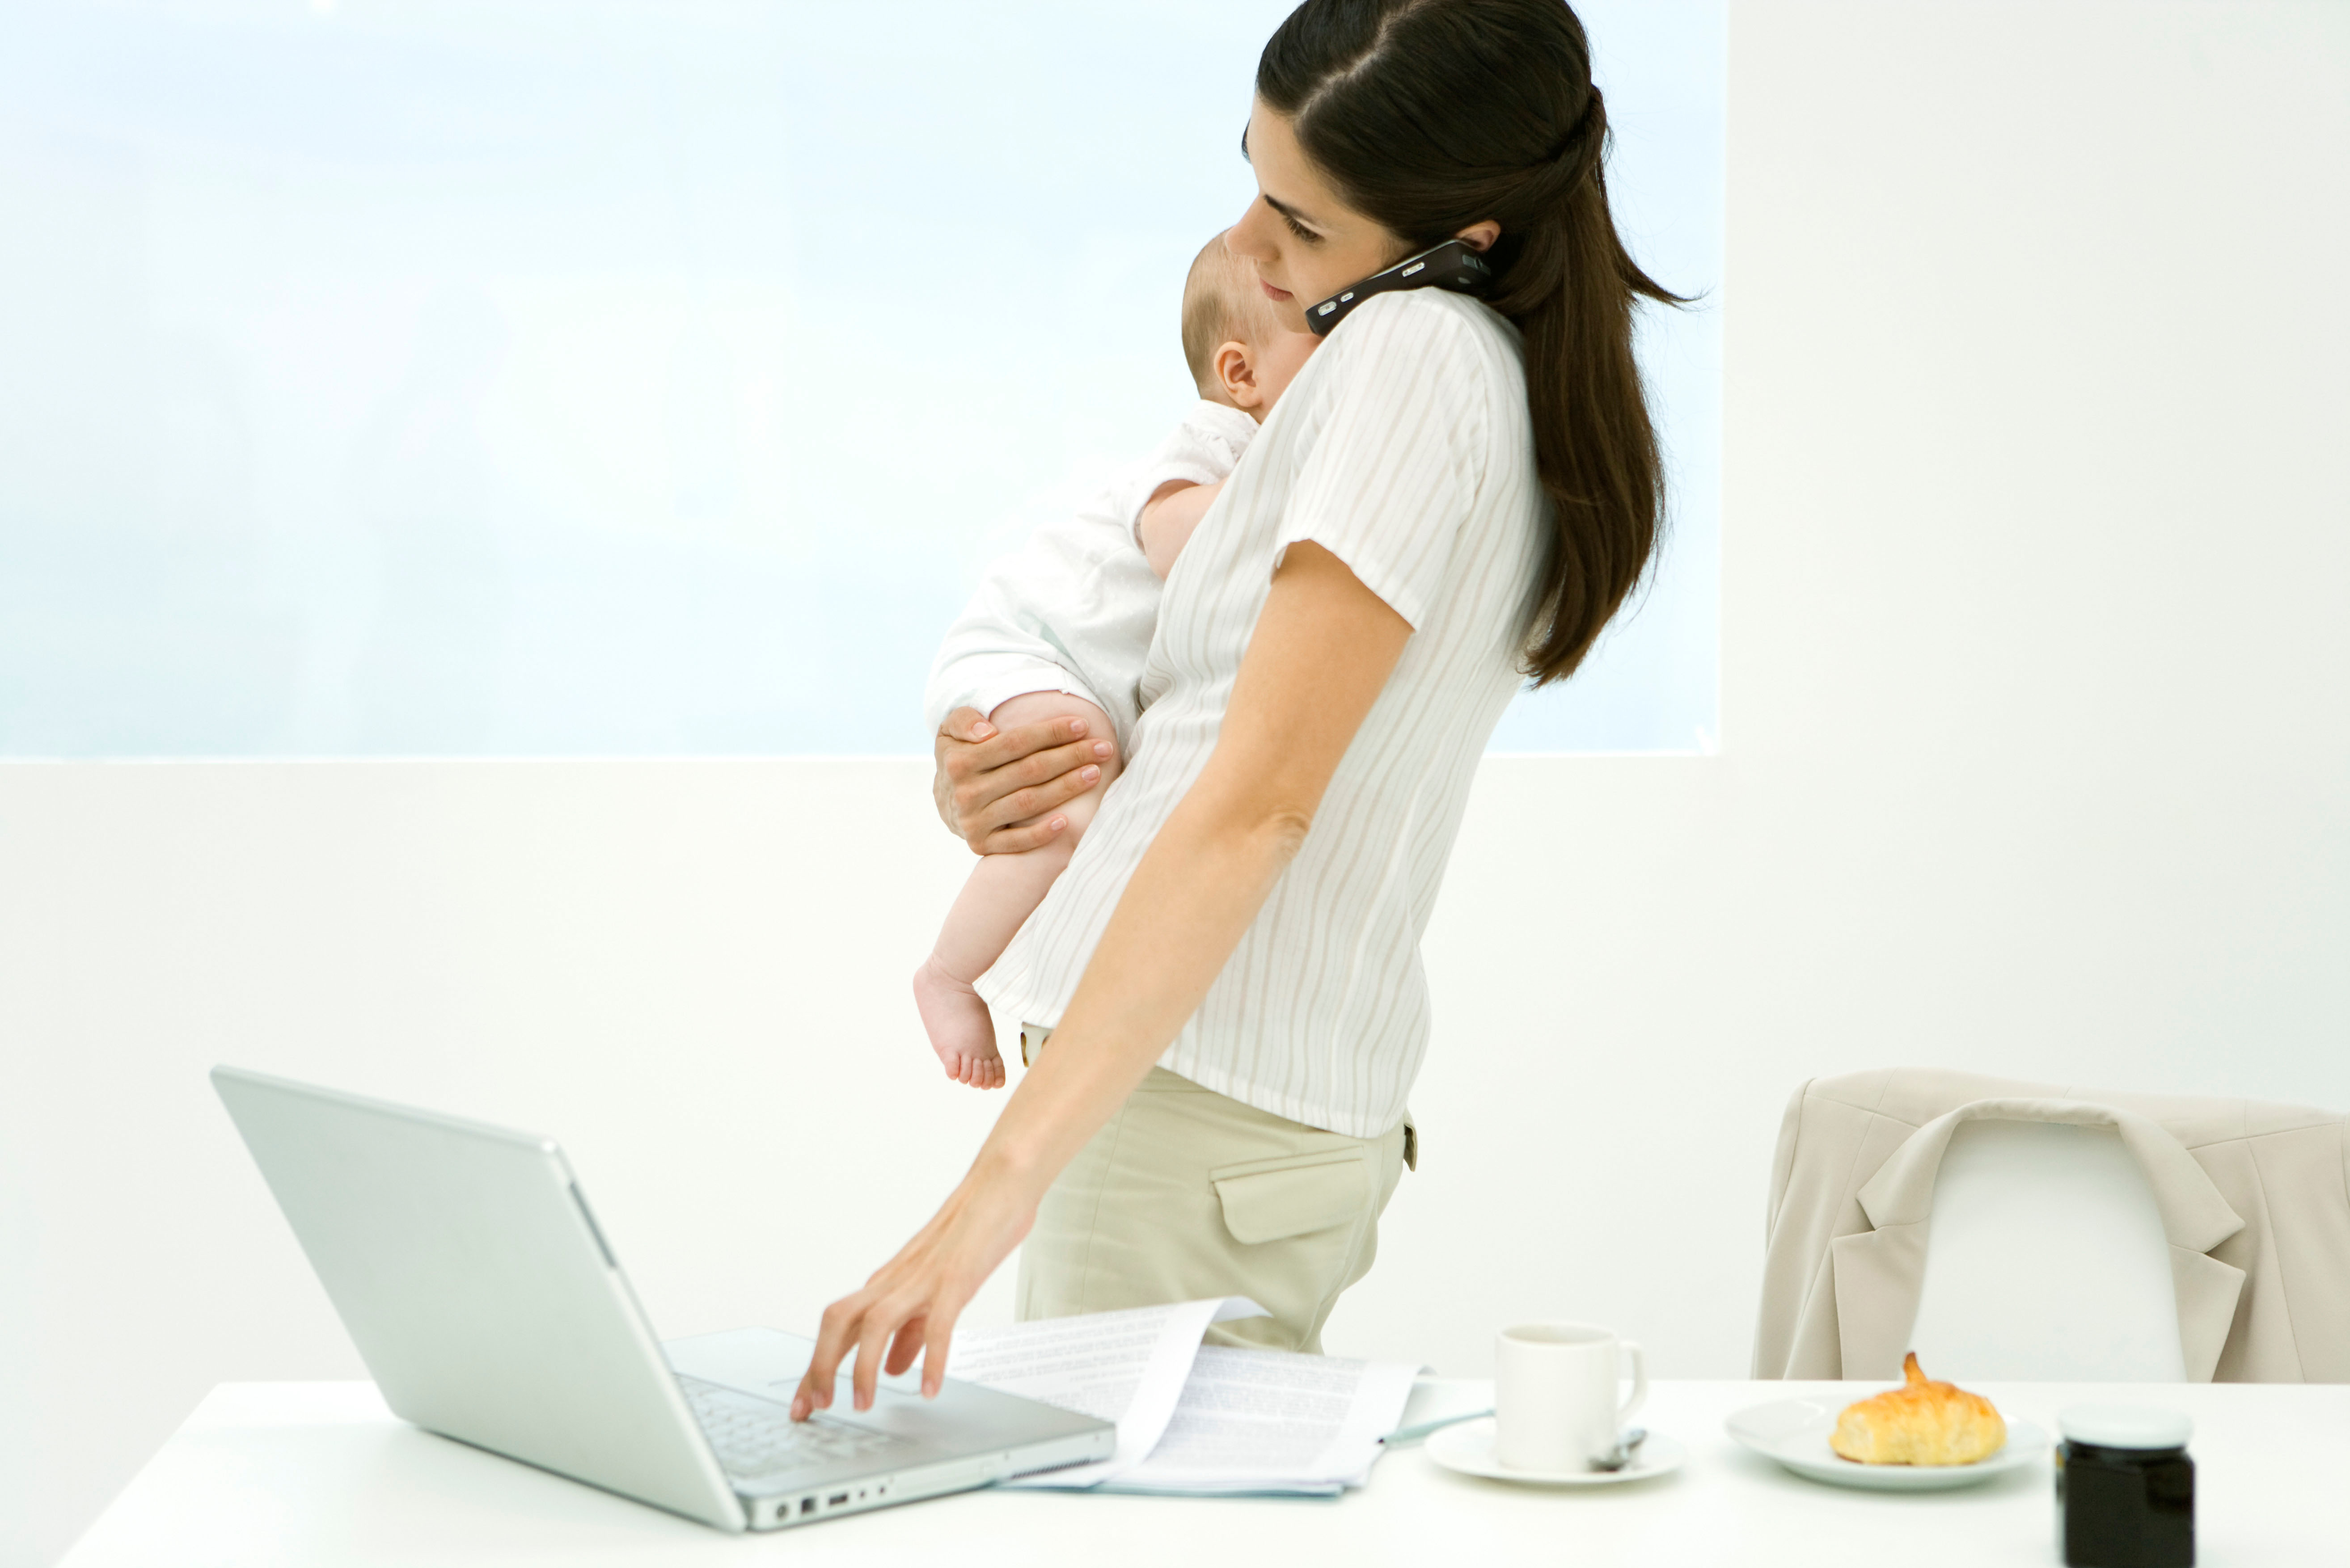 7 Ideas That Could Make Life Easier for Working Parents